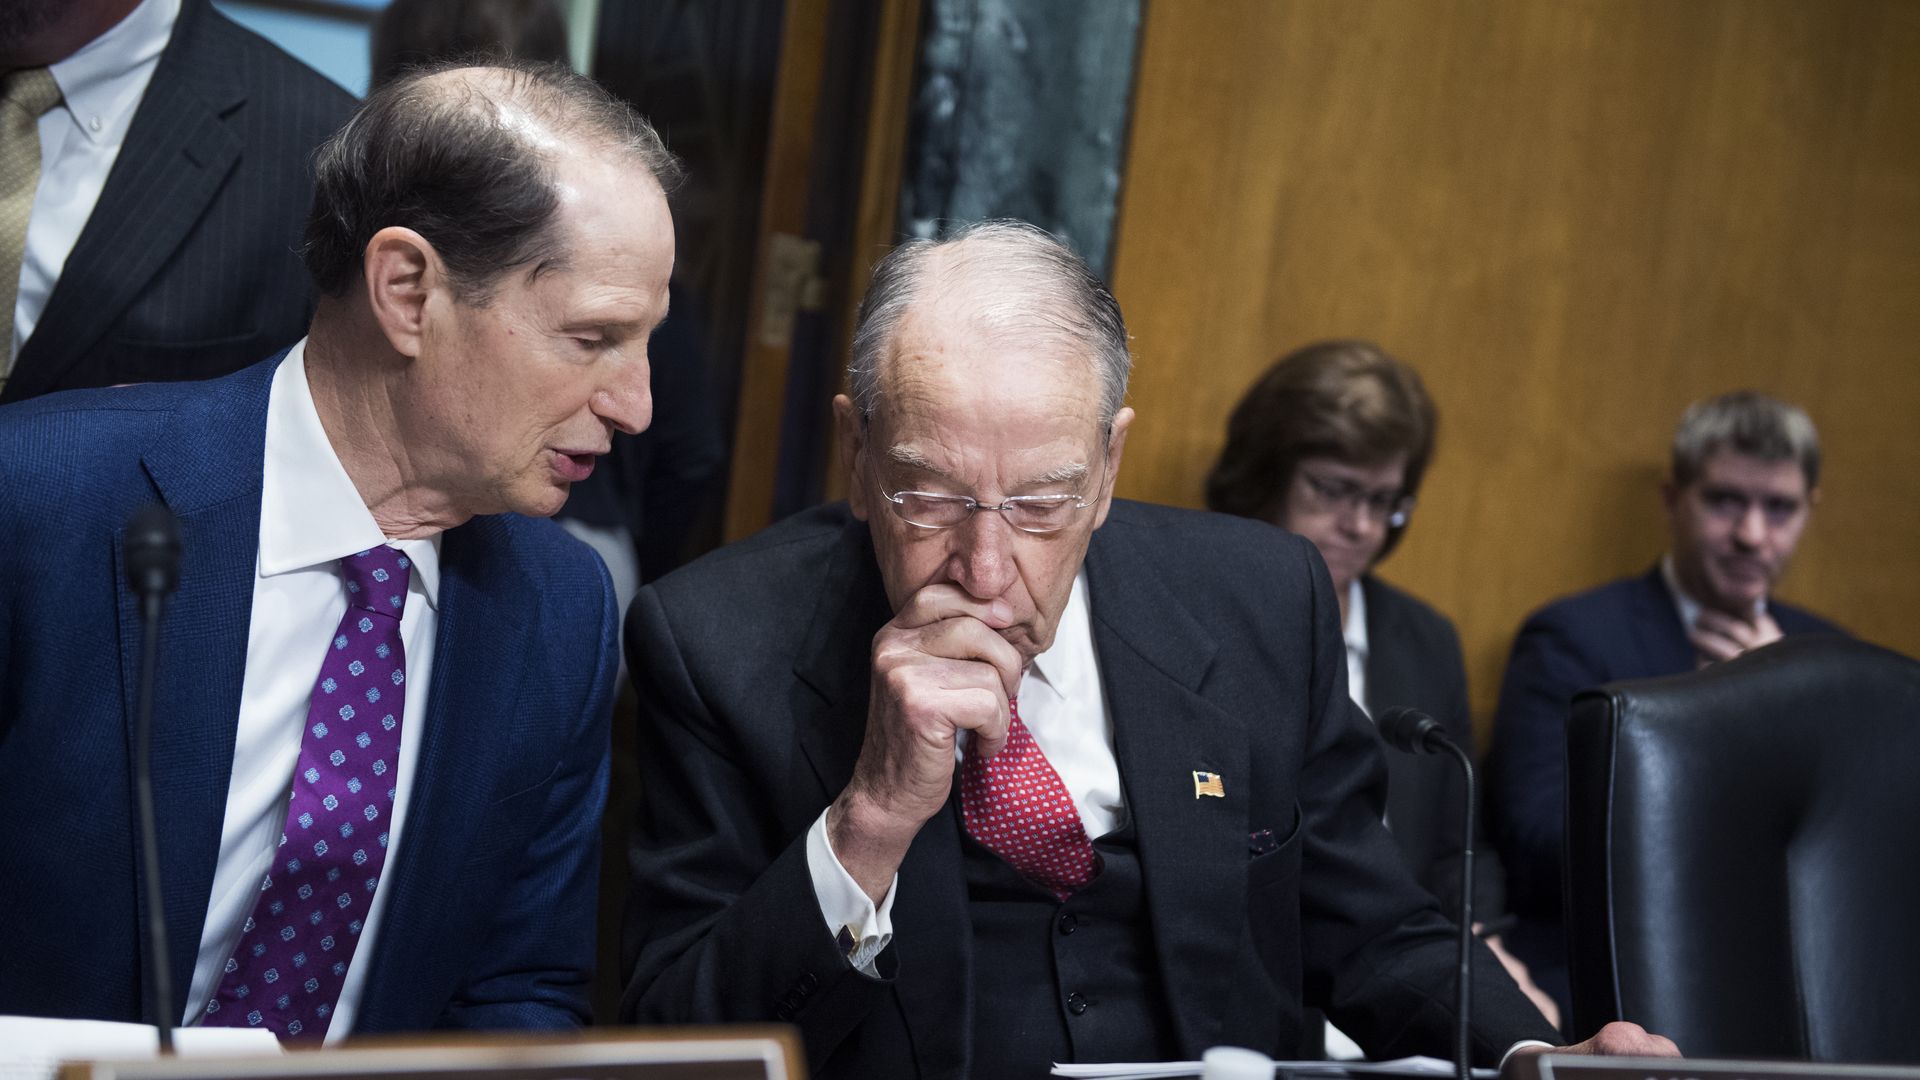 Sens. Ron Wyden and Chuck Grassley confer during a hearing